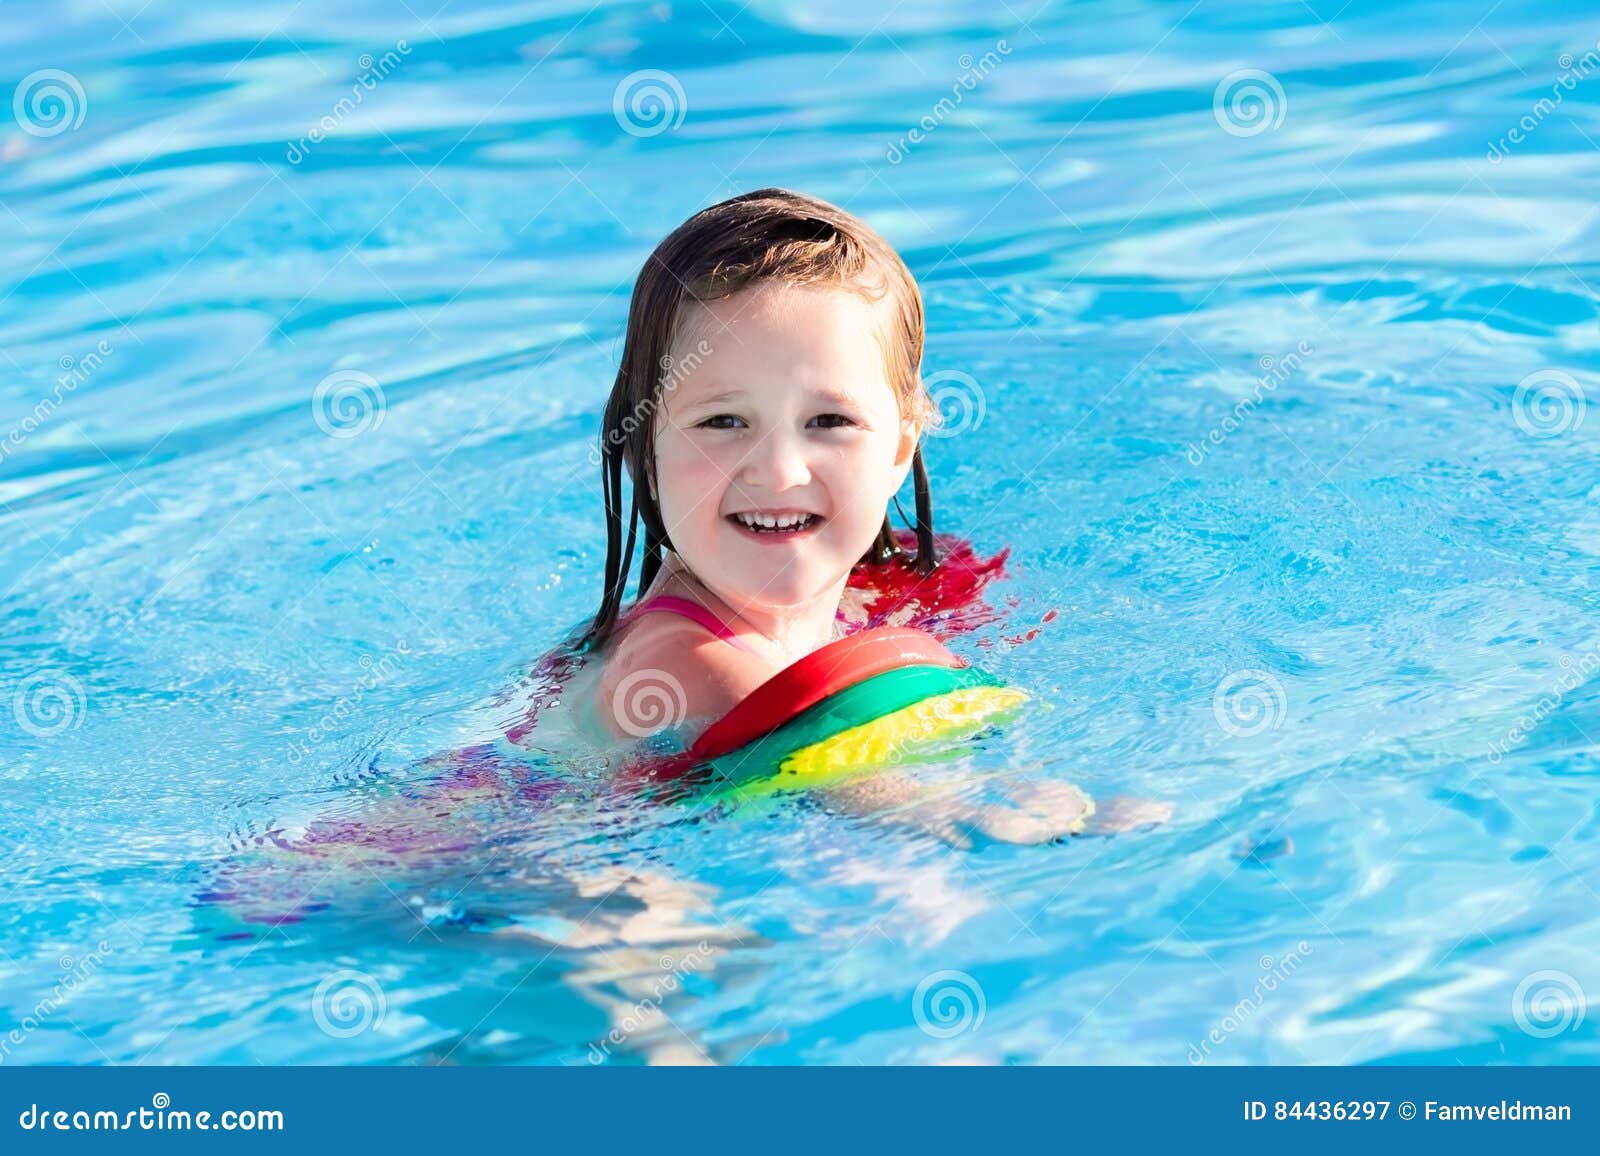 Little Child in Swimming Pool Stock Image - Image of floaties, playing ...